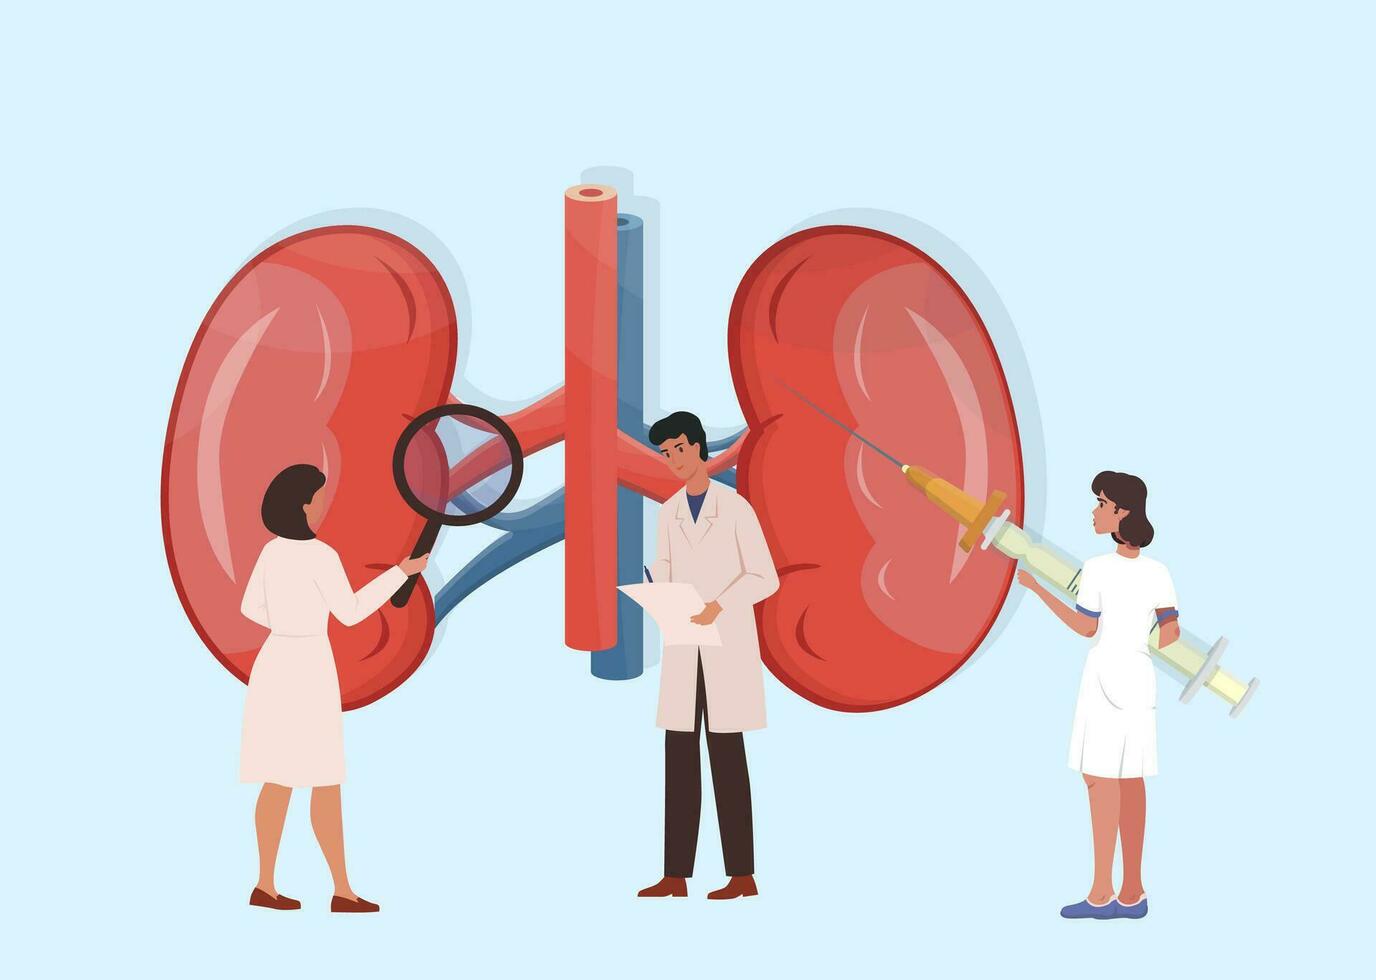 Doctors carrying out medical research, examination of kidney. Kidney disease treatment by professionals. Check of health and condition. Kidney stones. Nephrology, urology concept. vector illustration